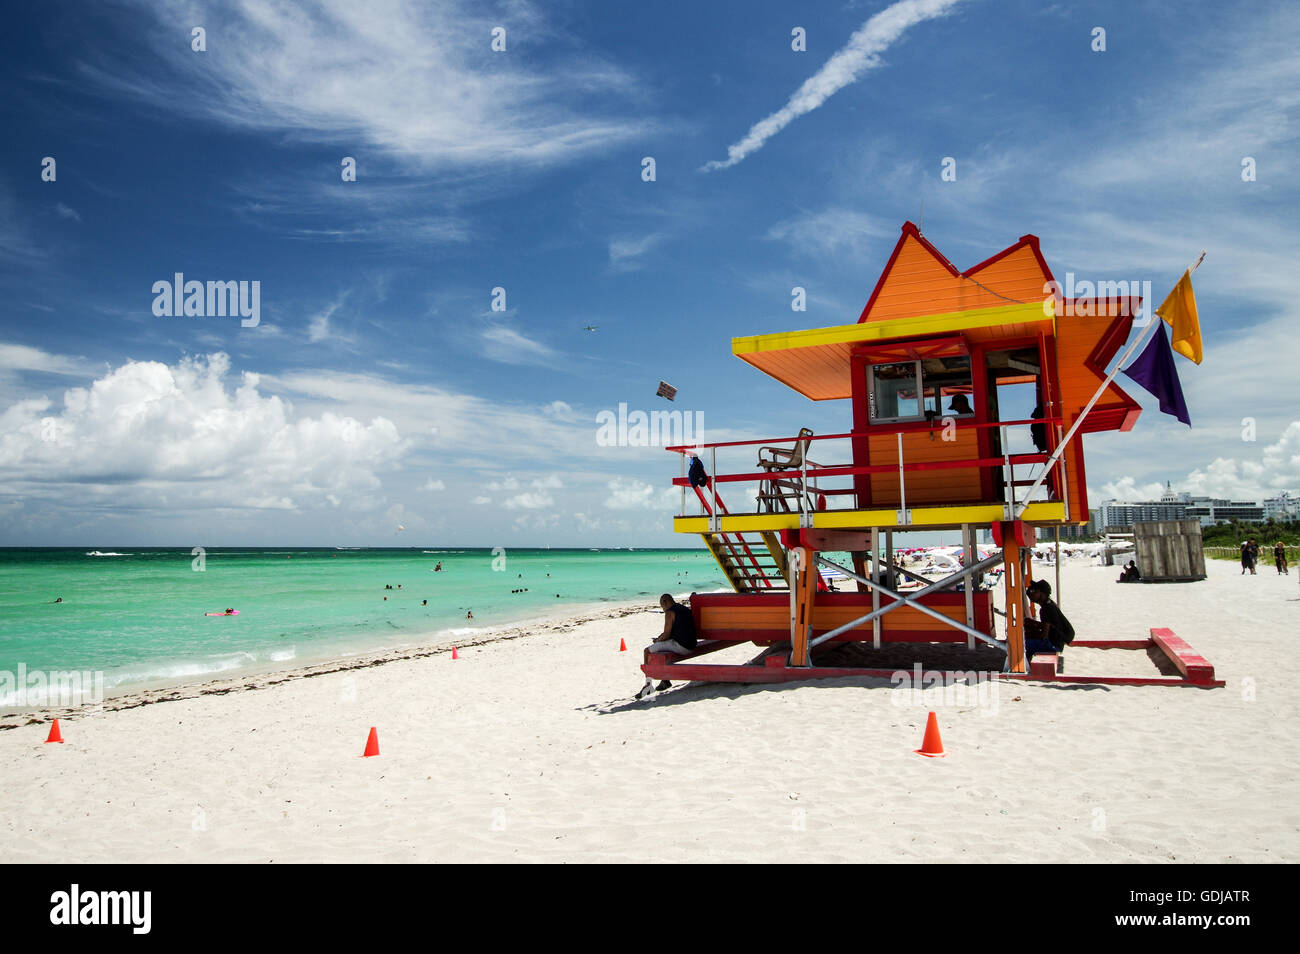 Lifeguard stand on South Beach, 24th Street designed by William Lane - Miami, Florida Stock Photo